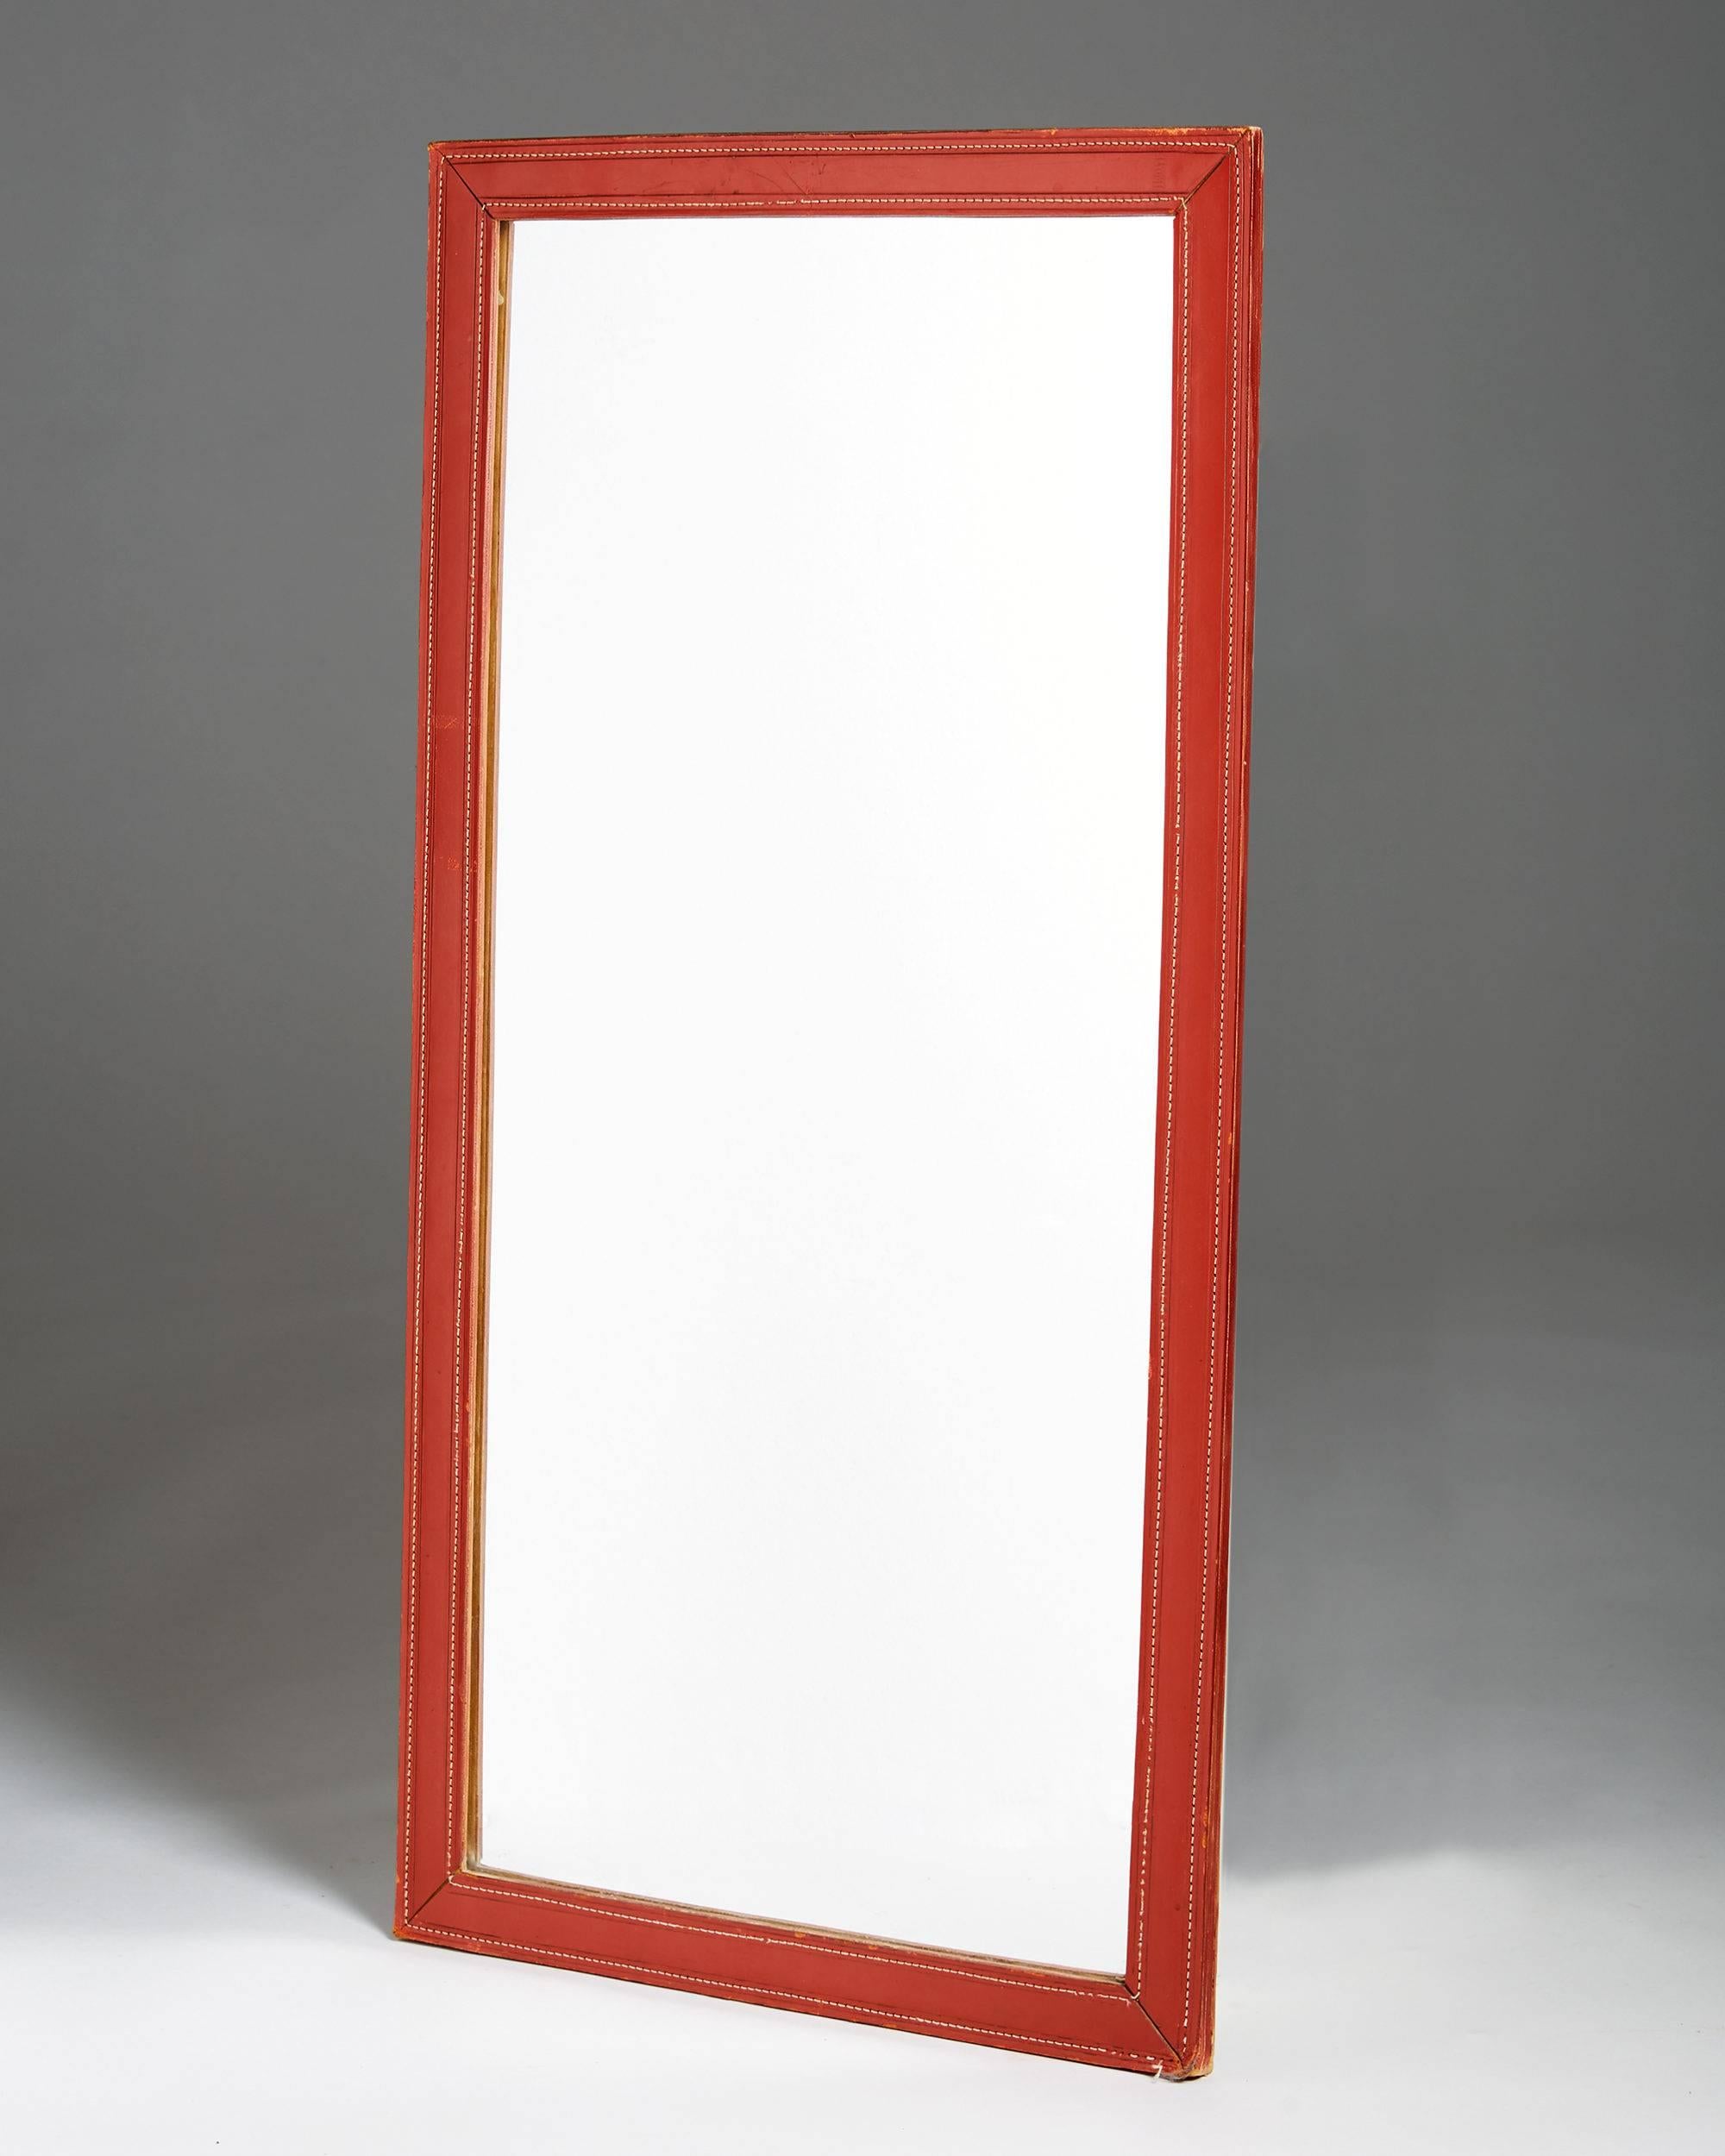 Mirror anonymous,	
Sweden. 1960s.

Stitched leather frame.

H: 91 cm/ 3''
W: 46 cm/ 18''